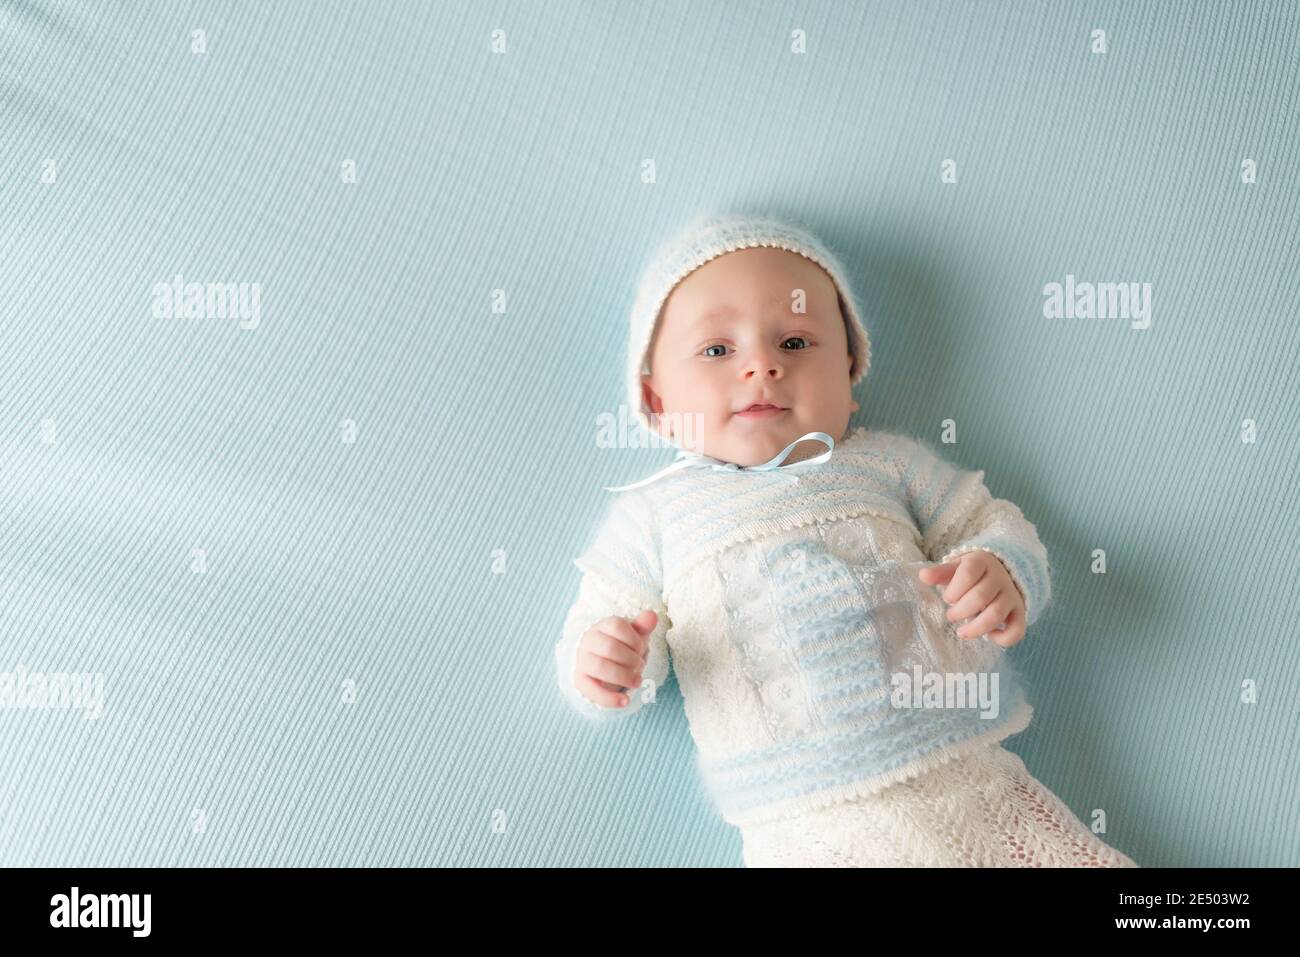 happy and smiling baby wearing blue and white suit on blue background Stock Photo